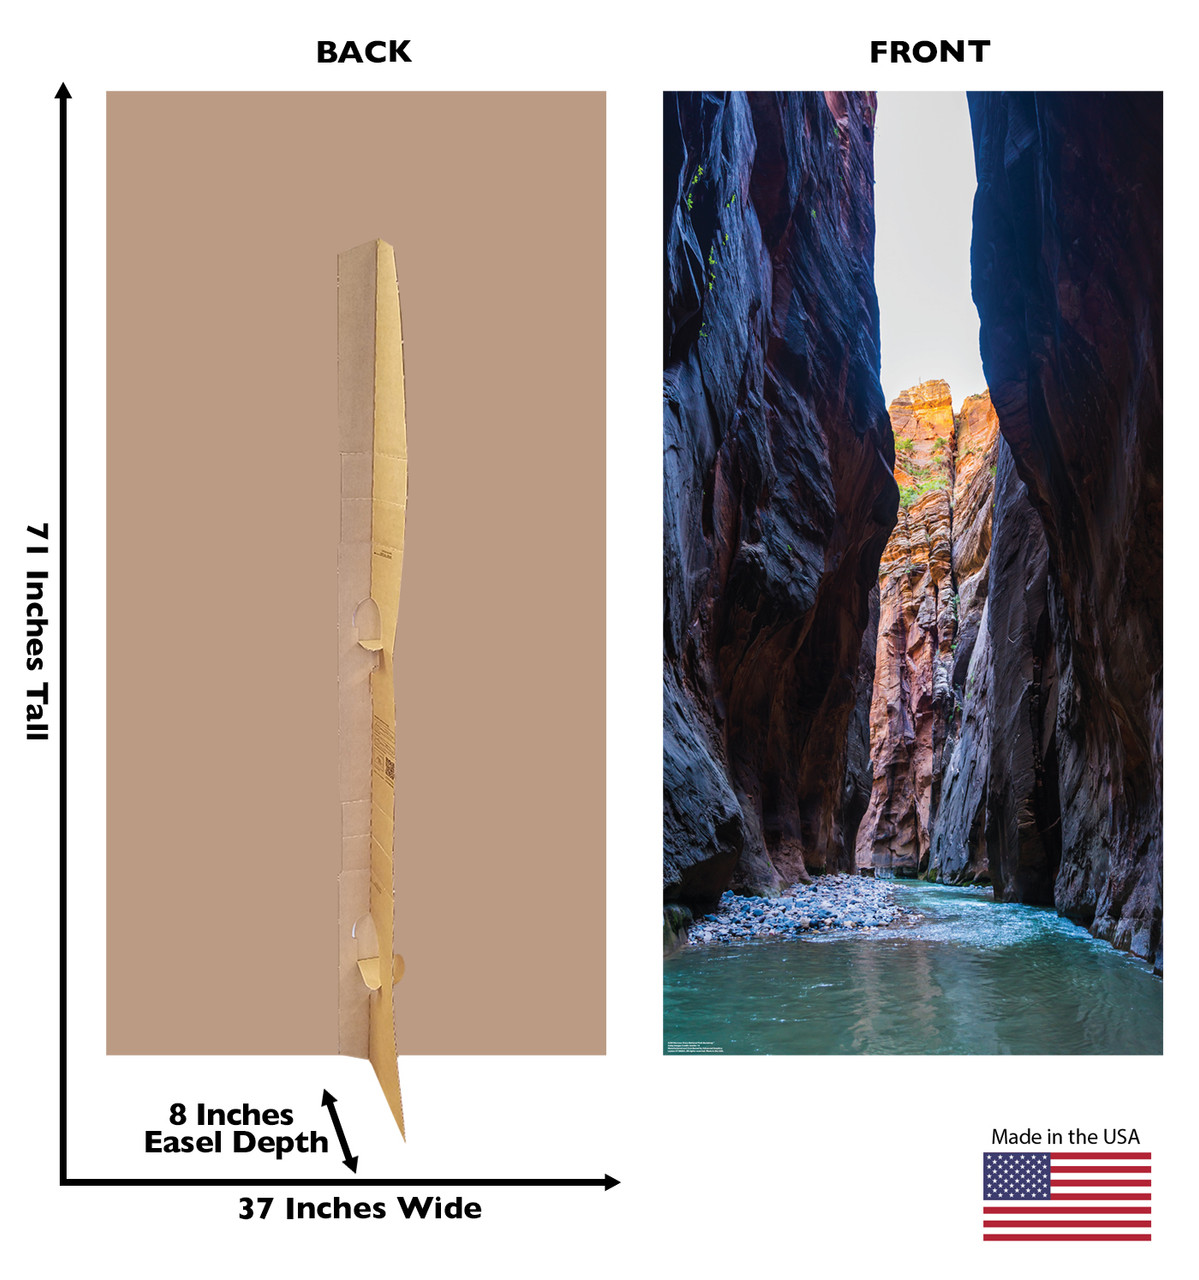 Life-size cardboard standee of a Narrows Zions National Park Backdrop with back and front dimensions.